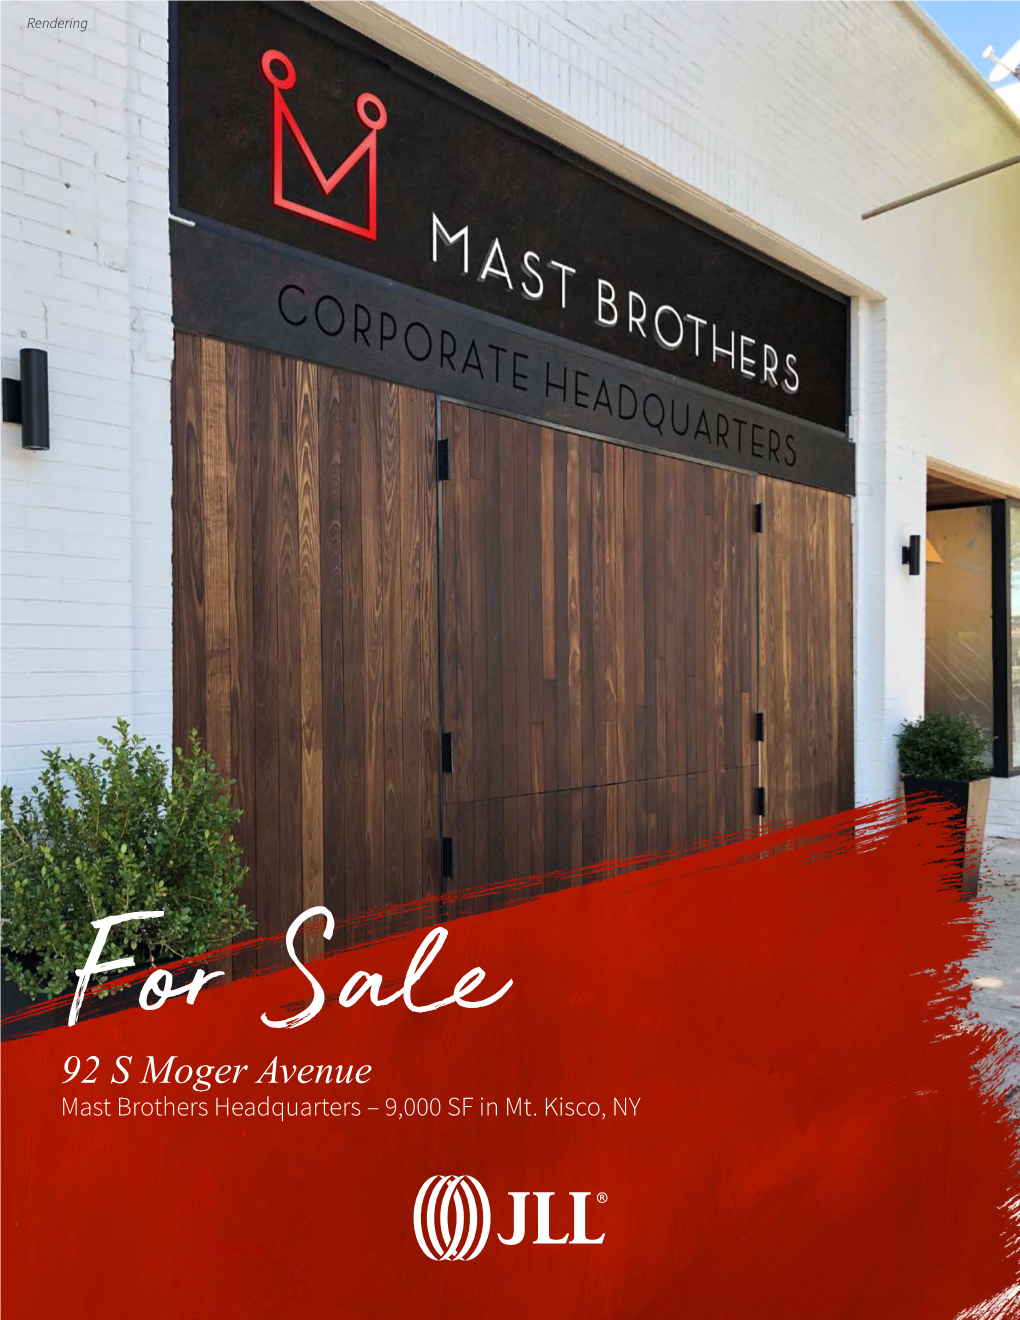 92 S Moger Avenue Mast Brothers Headquarters – 9,000 SF in Mt